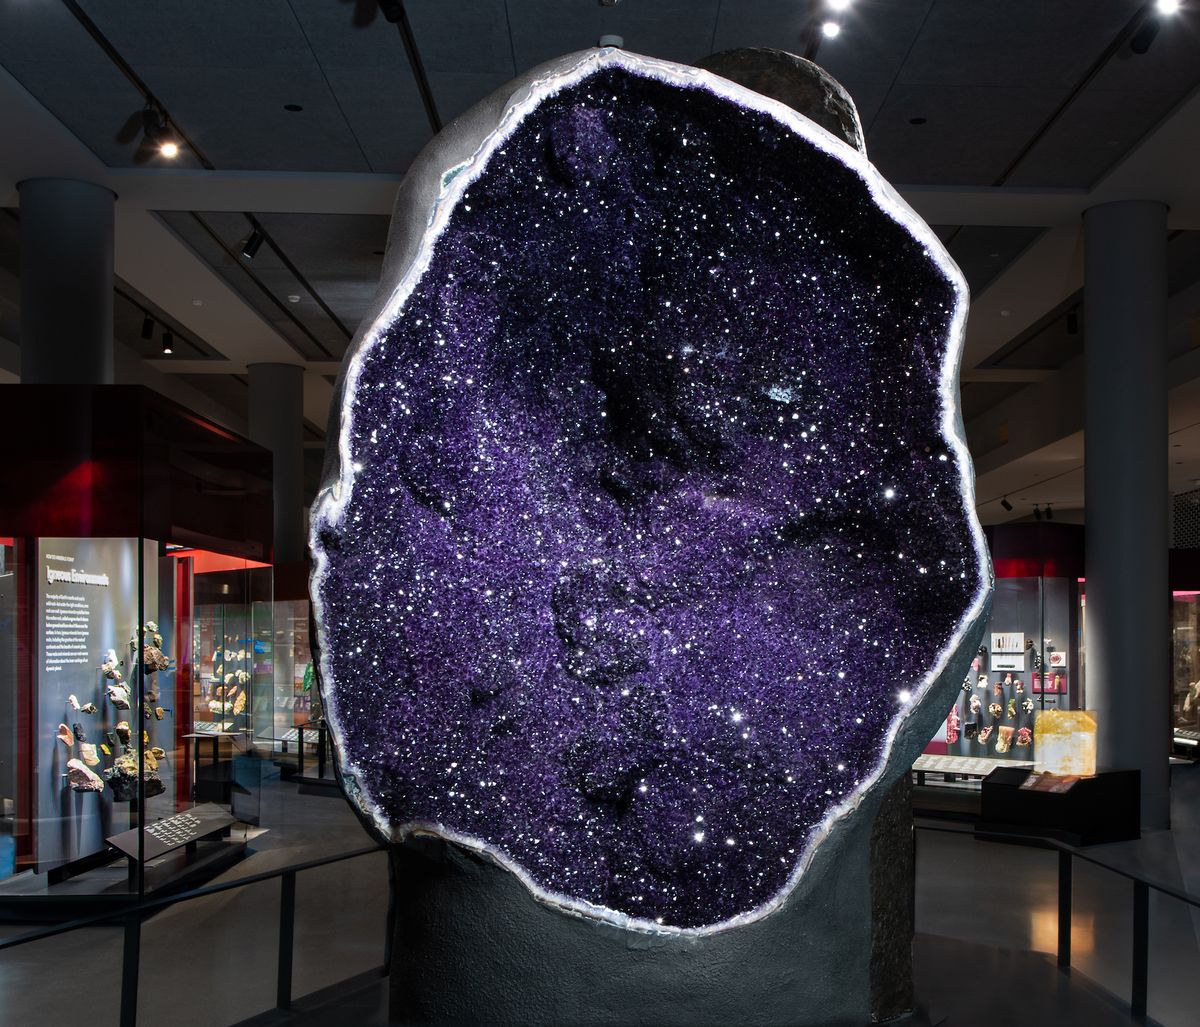 The amethyst geode pictured here stands 9 feet-tall, weighs around 12,000 pounds (5,440 kg), or about as much as four black rhinos, and was collected from the Bolsa Mine in Uruguay D. Finnin/©AMNH